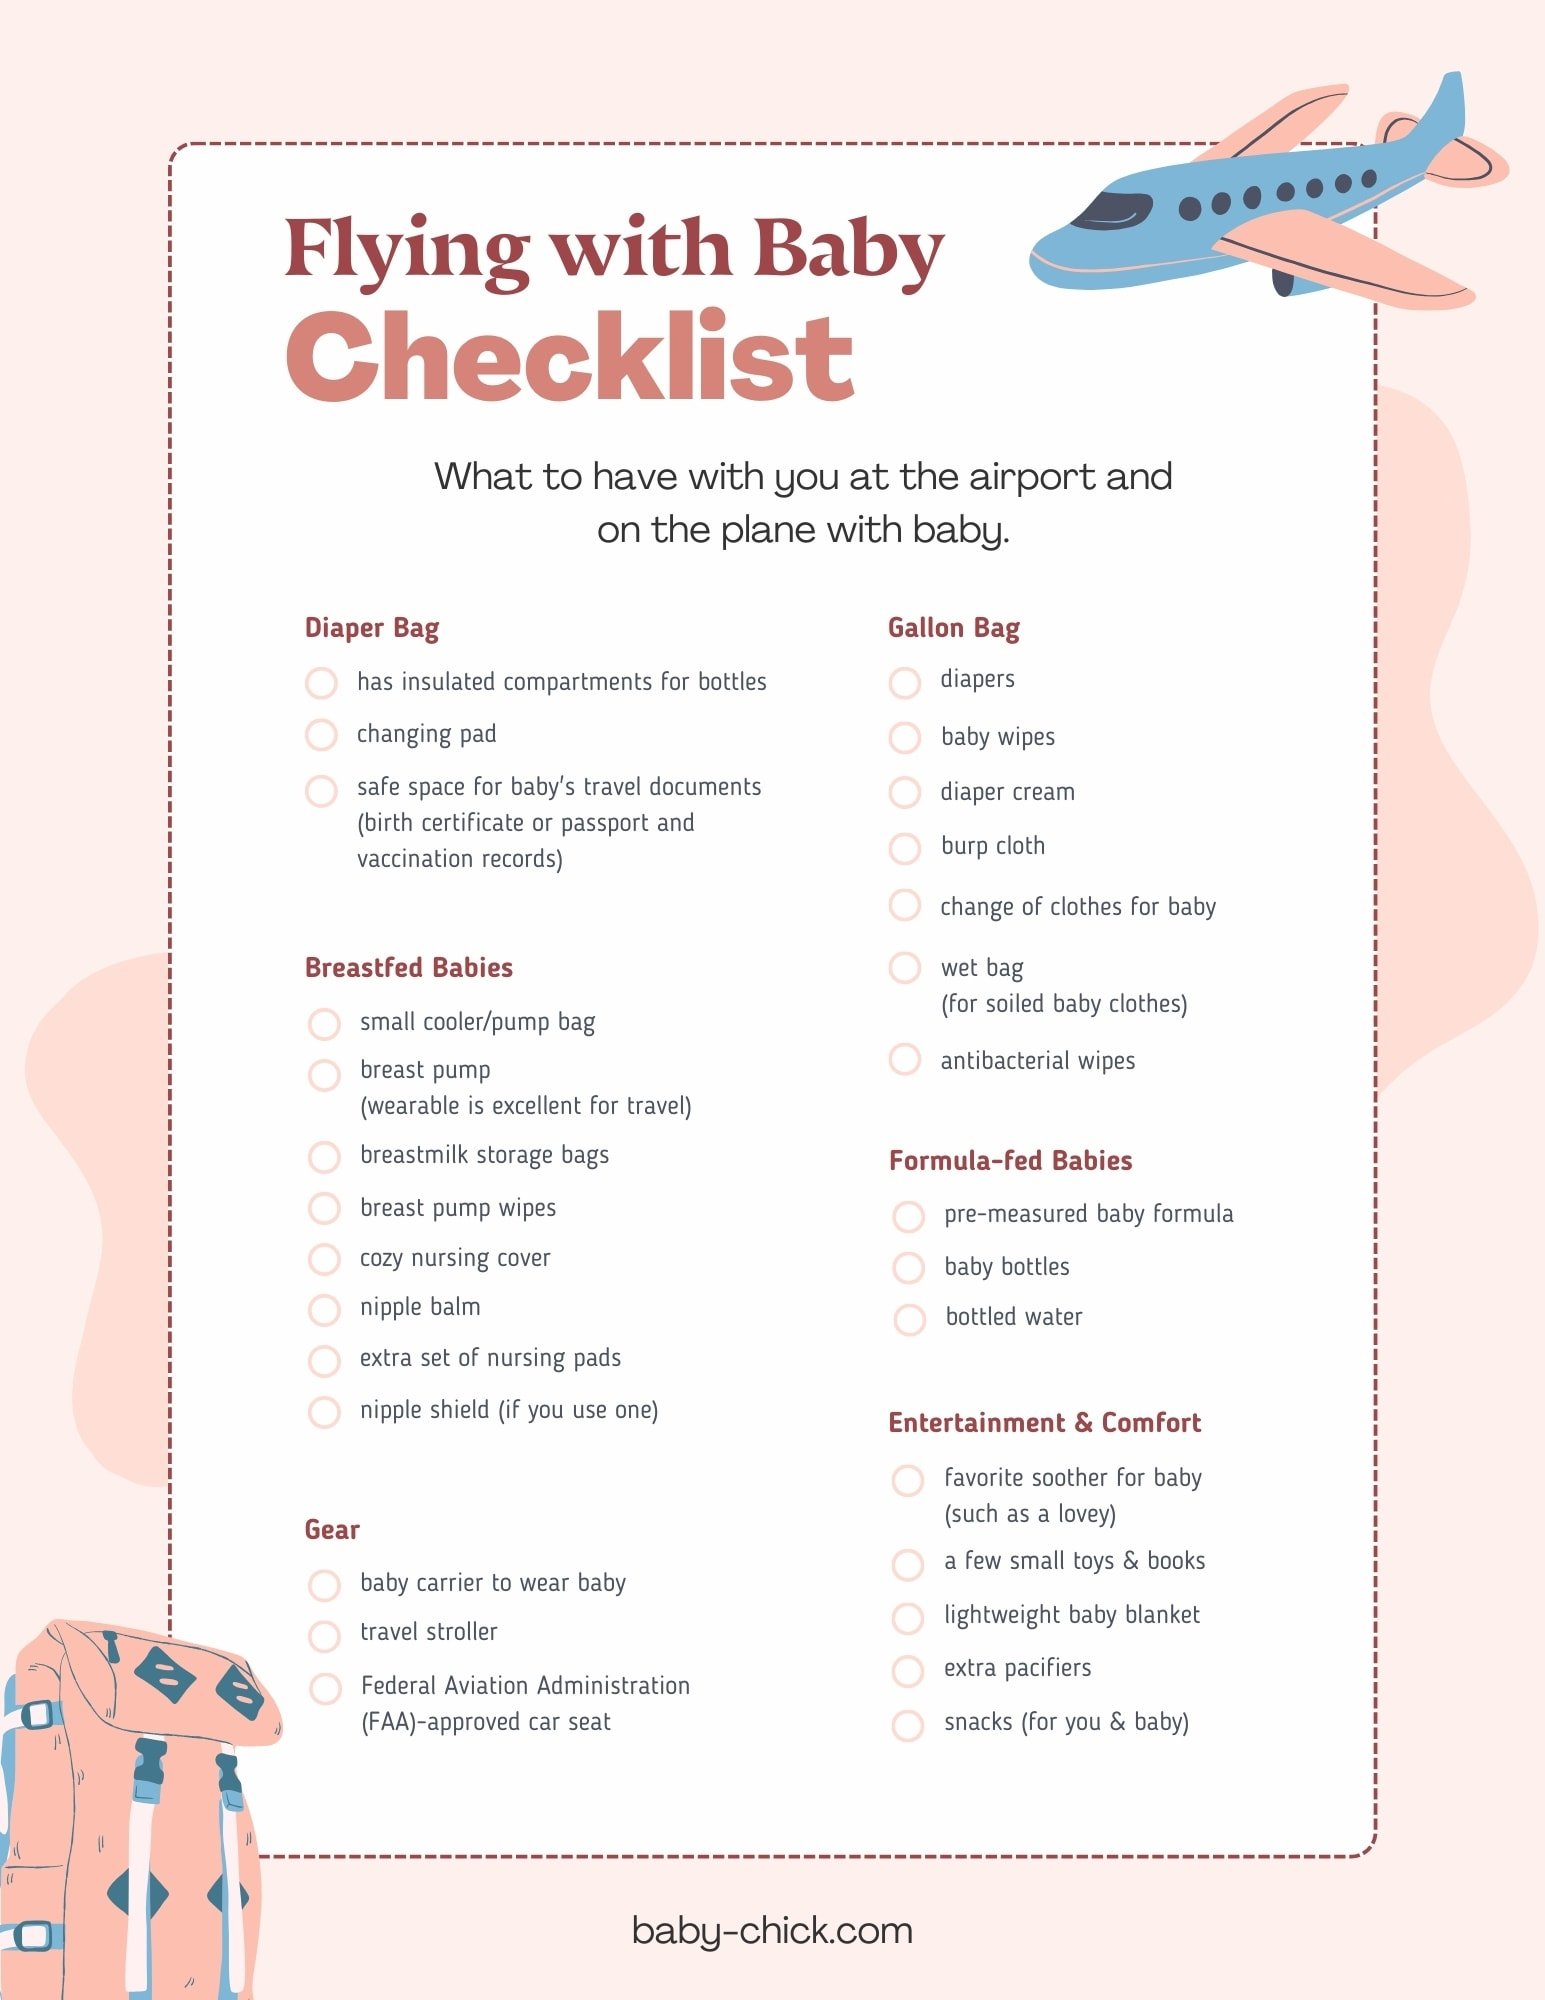 Flying with Baby Checklist graphic